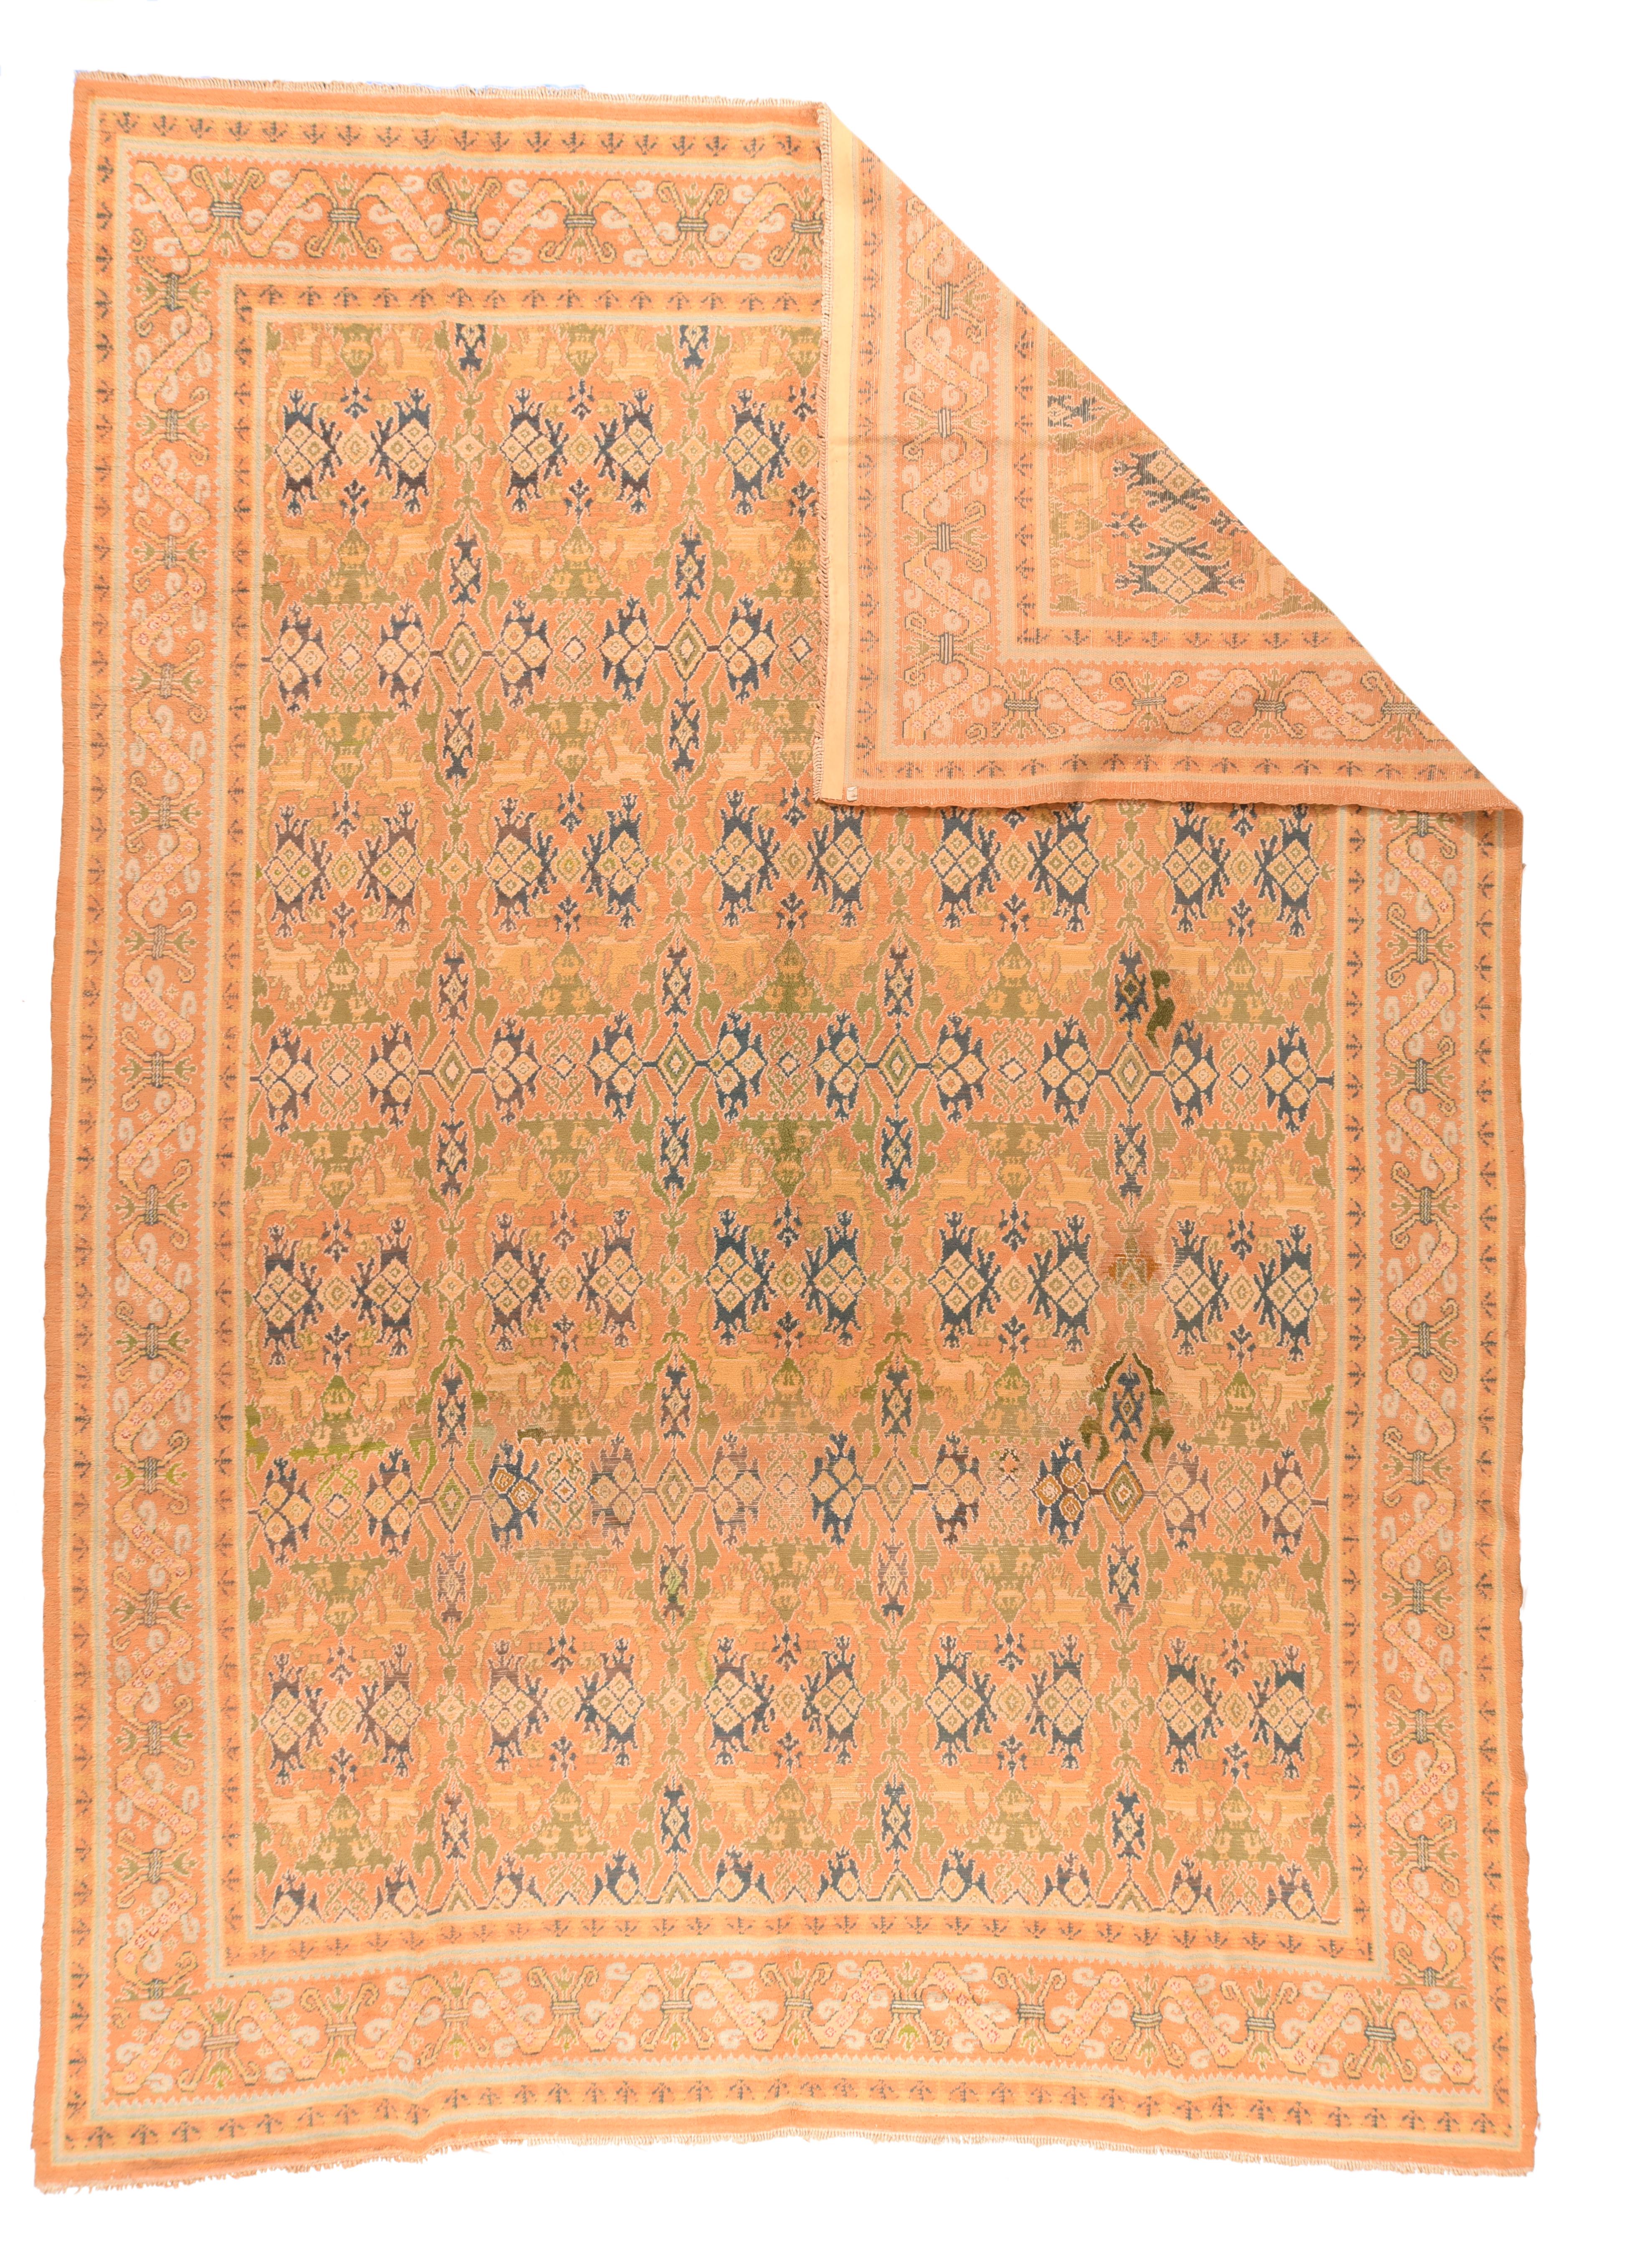 Antique Spanish Rrug 9'8'' x 13'4''. In the Renaissance style, and adapted from Lotto Oushaks, this European room size shows golden ochre field covered by an allover pattern of forked arabesque and blue palmette crosses and pairs. Rust-apricot